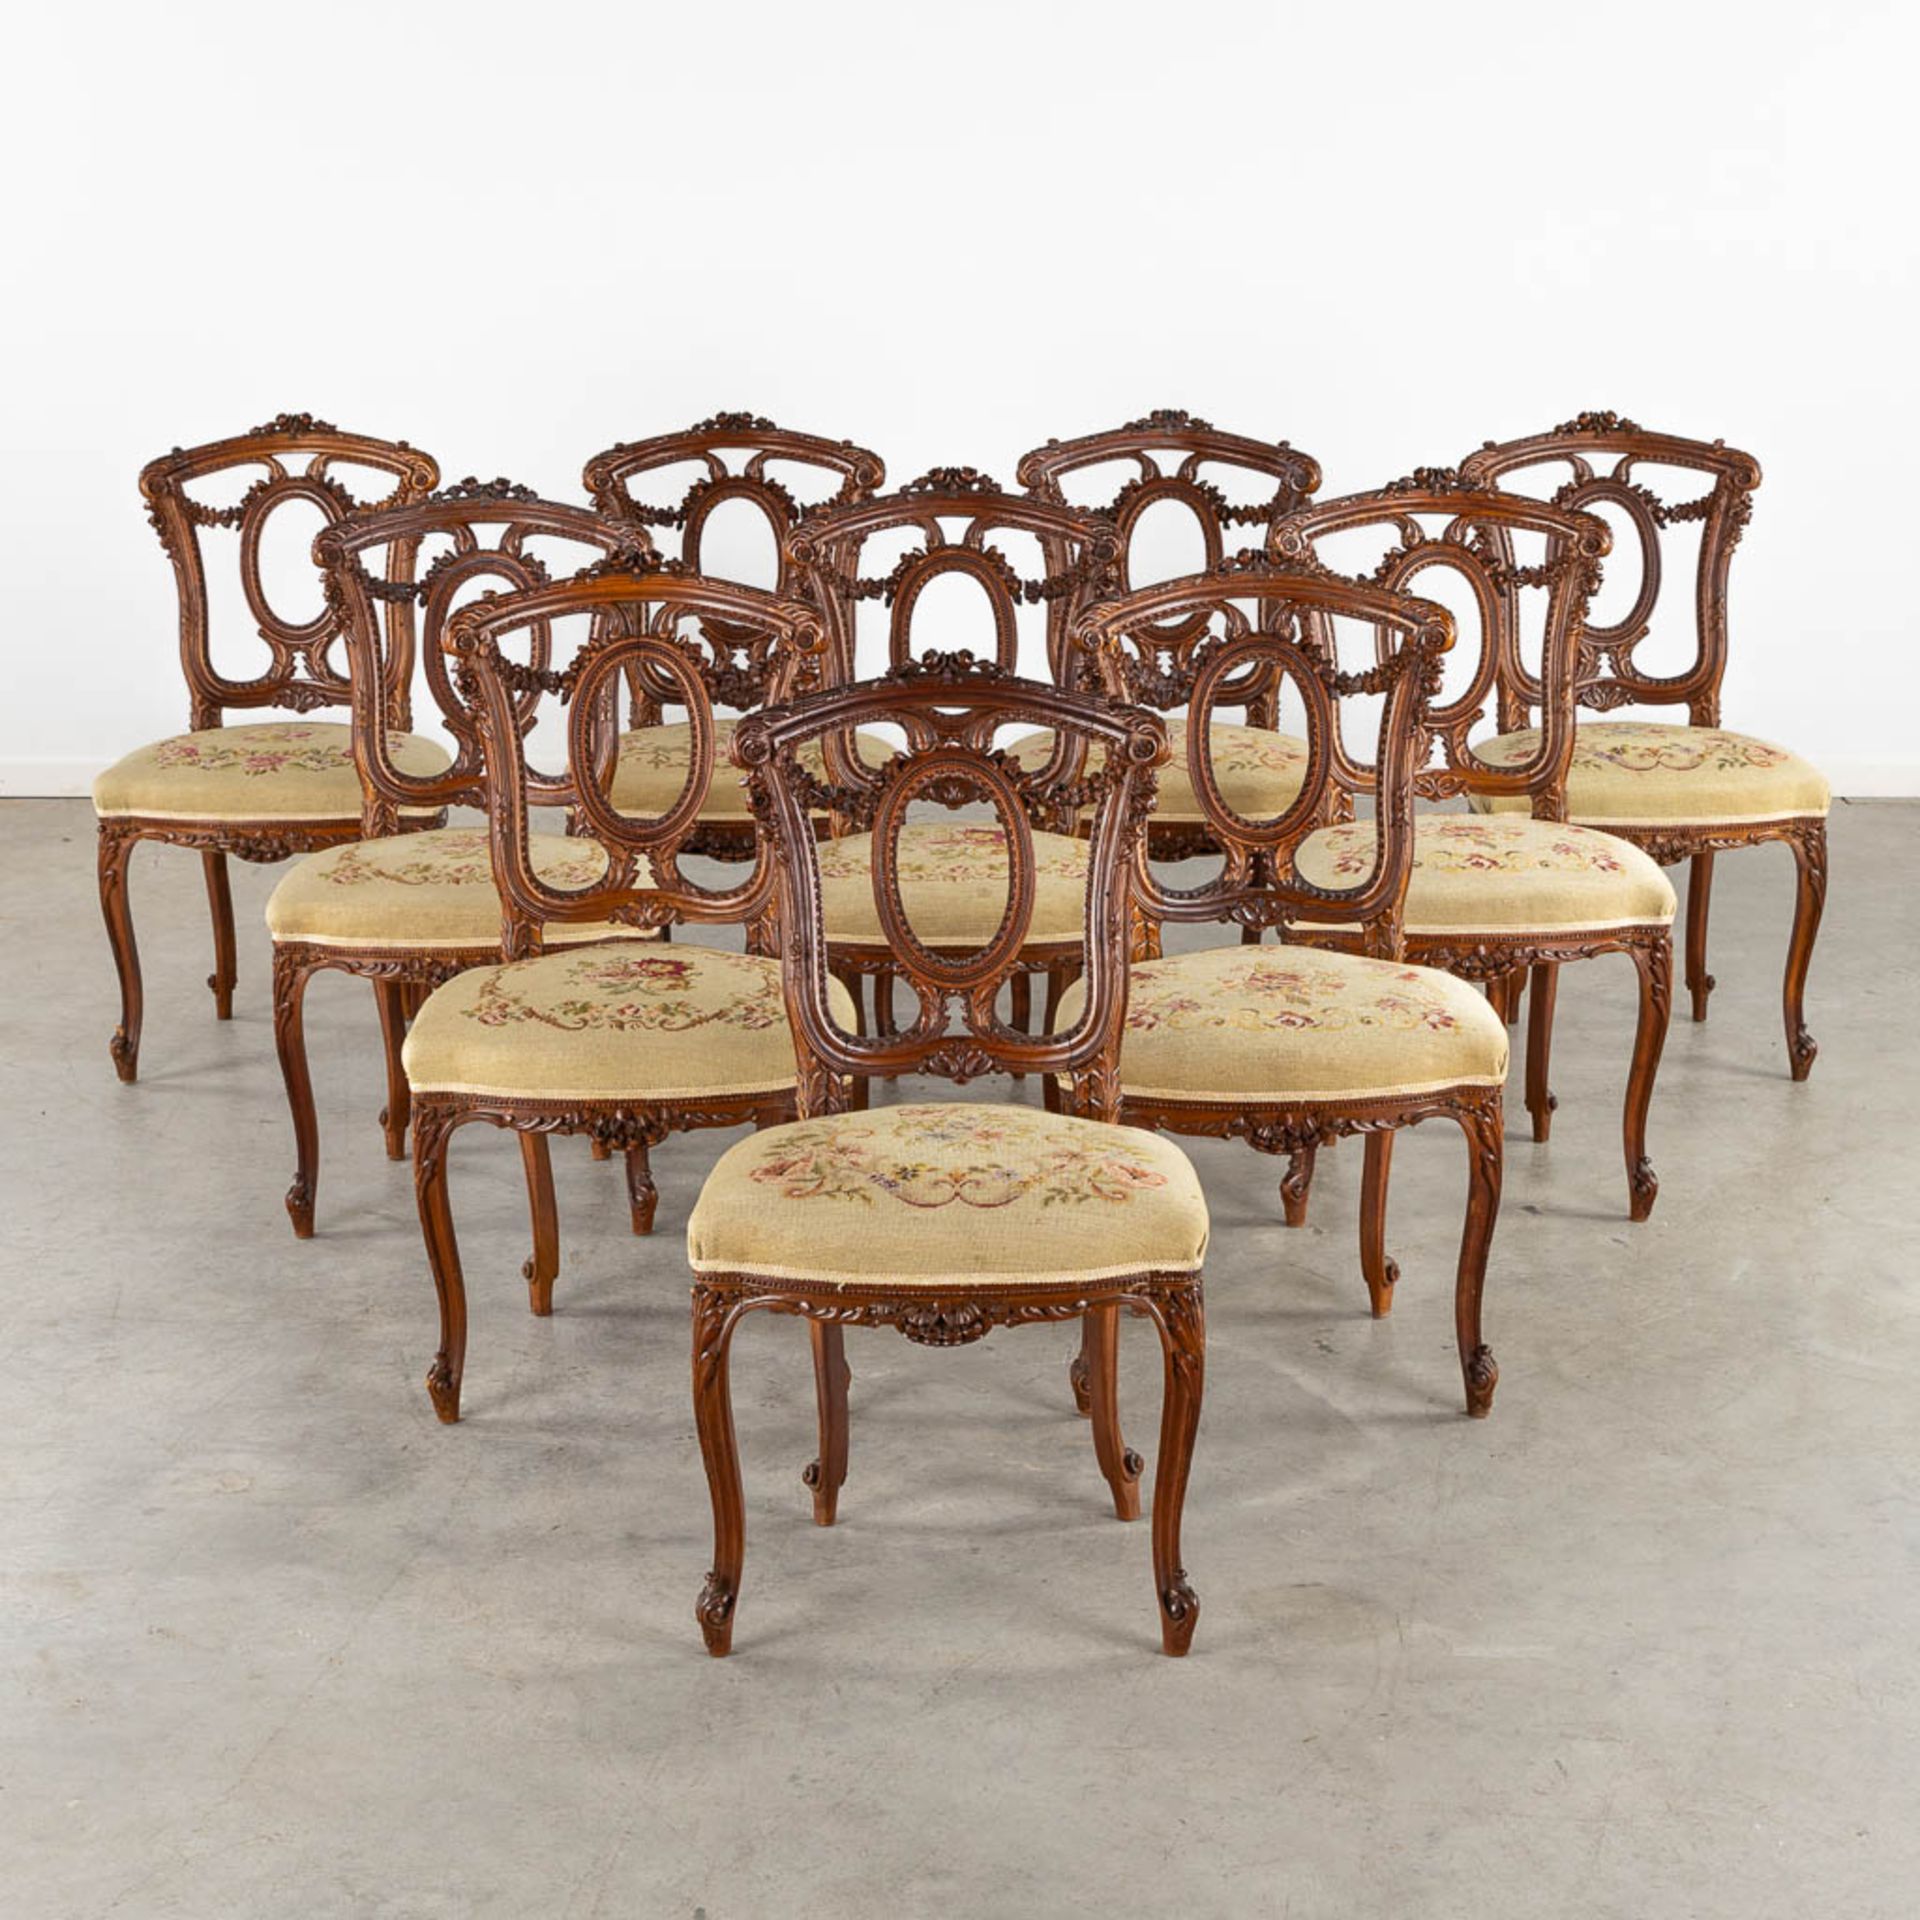 An exceptional set of 10 chairs, finely sculptured wood and embroideries in Louis XVI style. (L:51 x